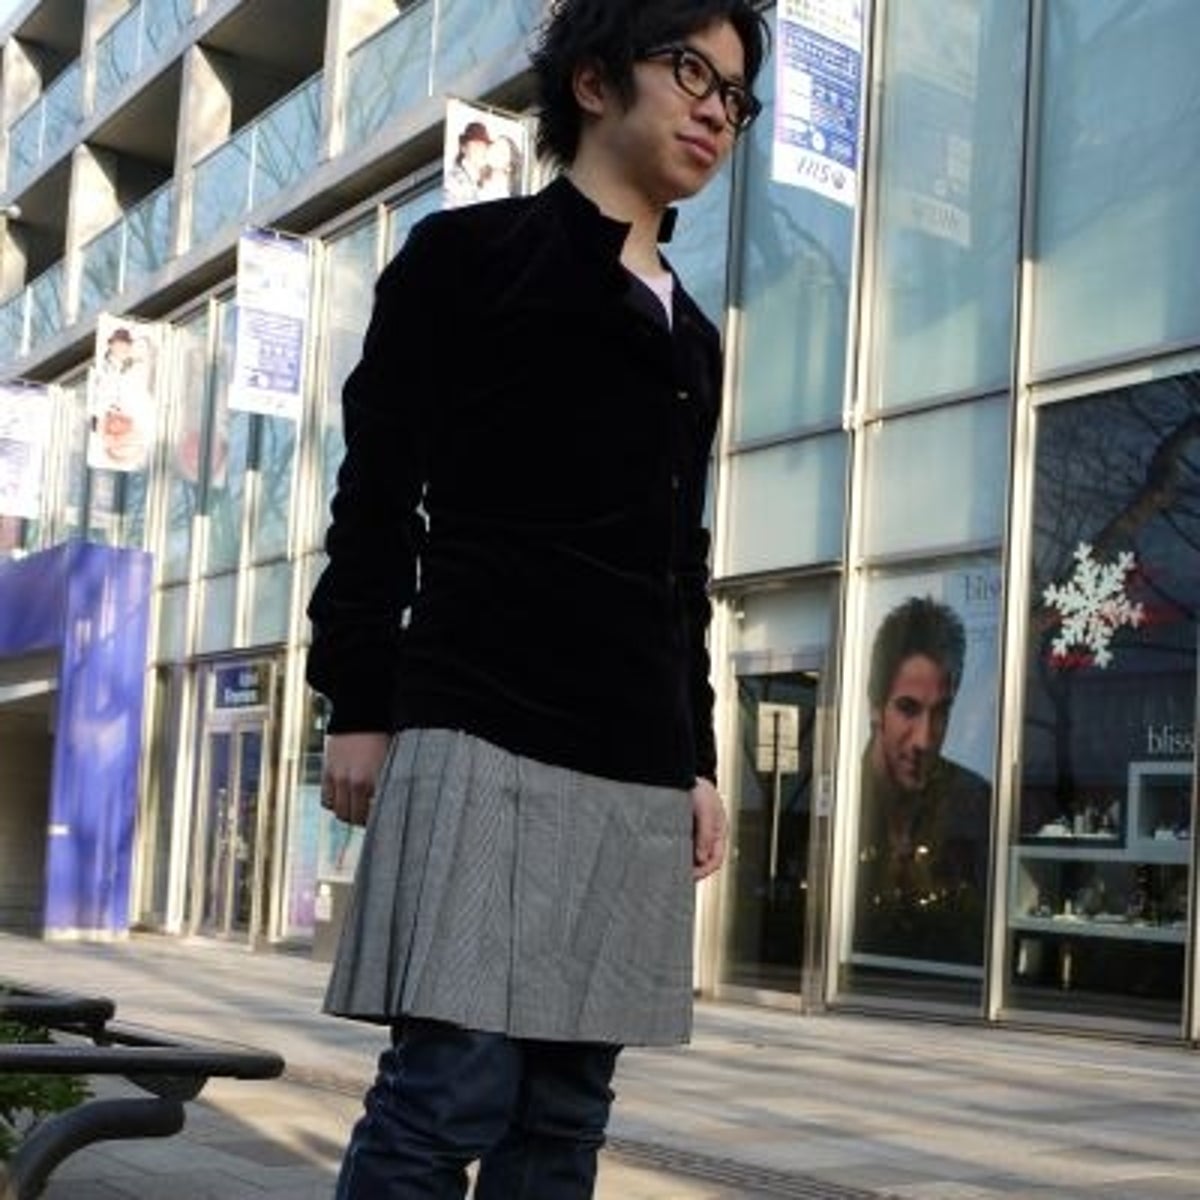 Japanese men shun shorts for skirts | The Independent | The Independent